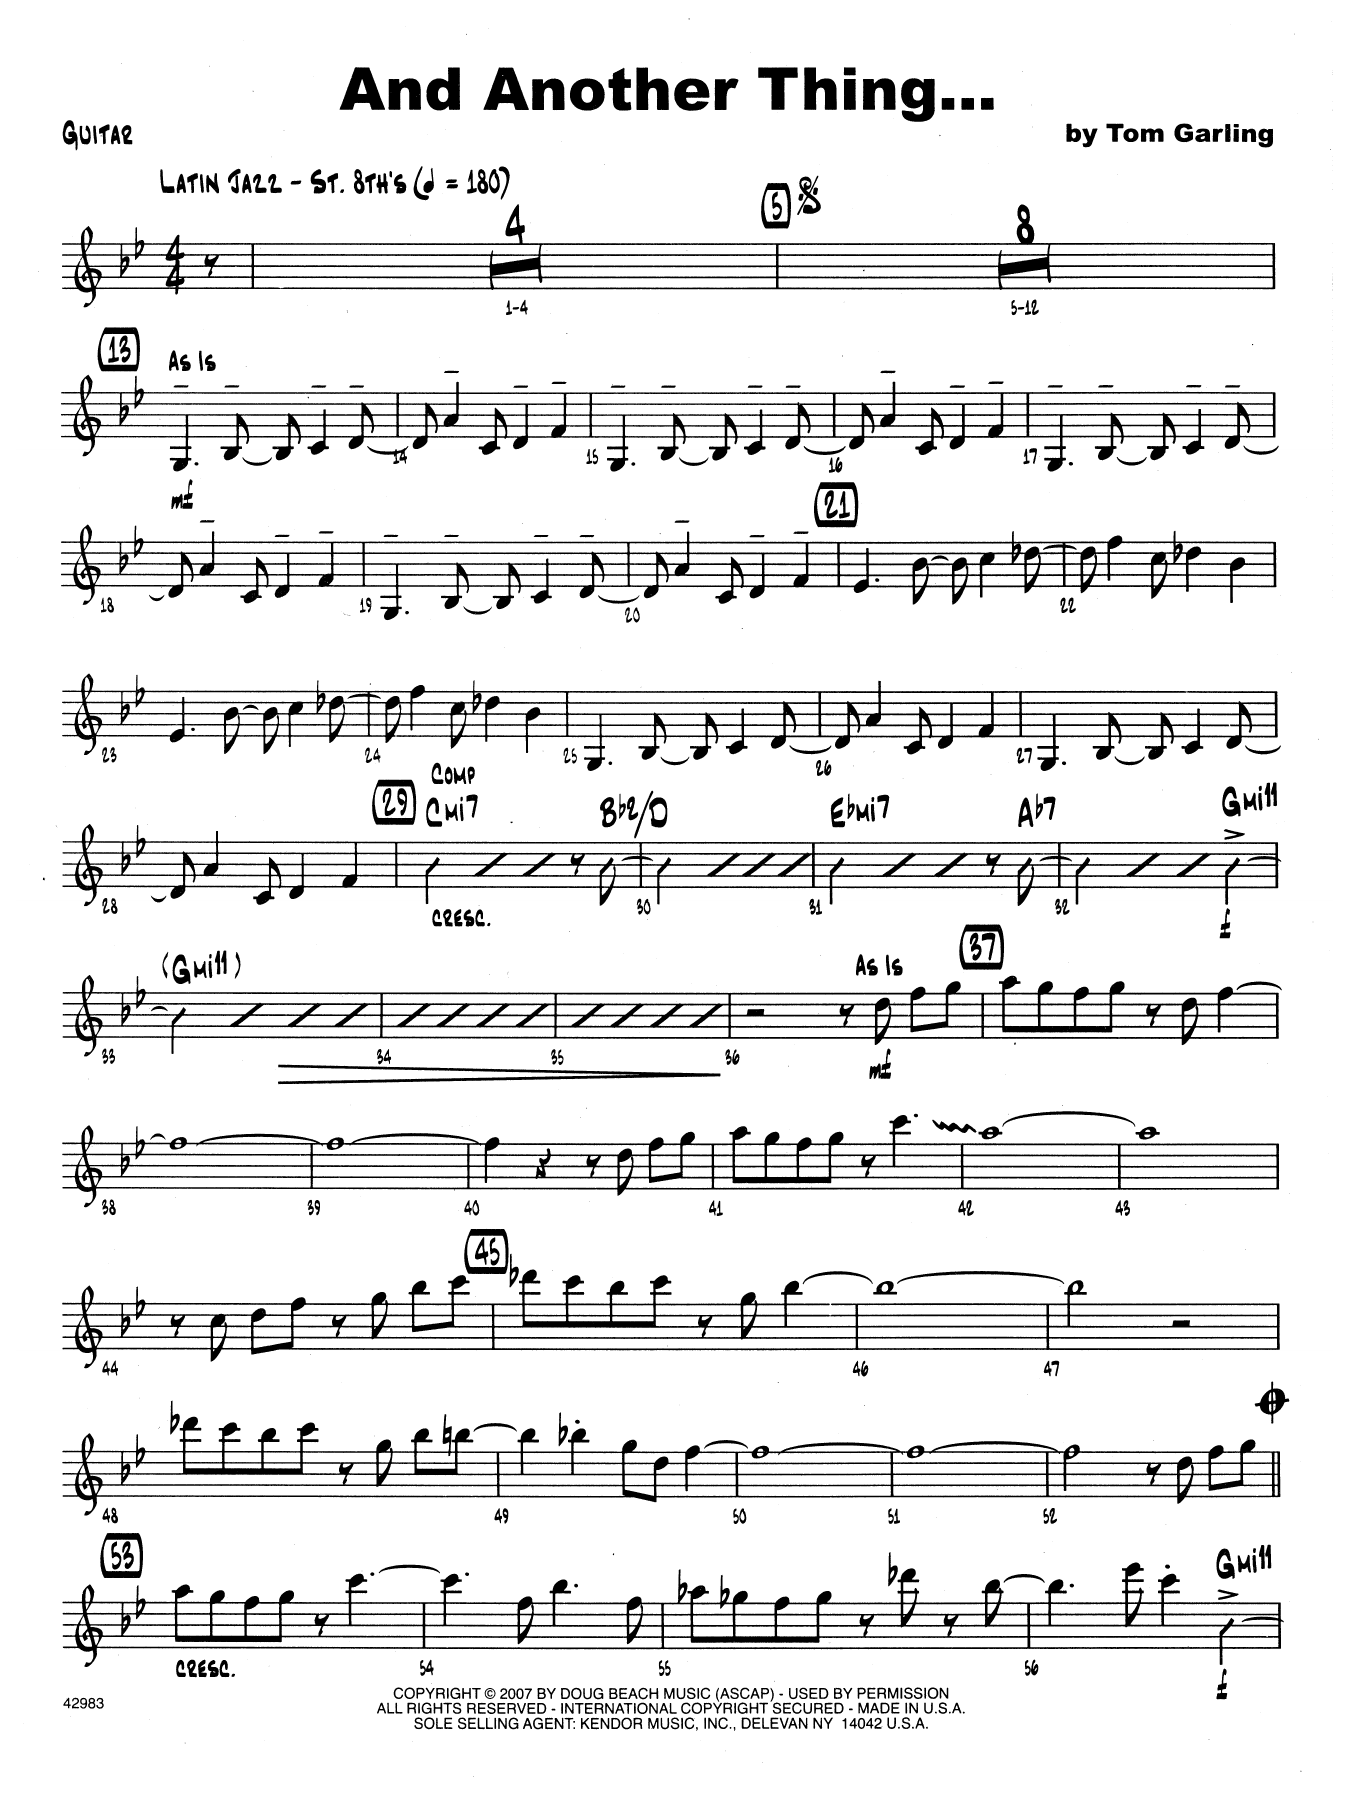 Download Tom Garling And Another Thing - Guitar Sheet Music